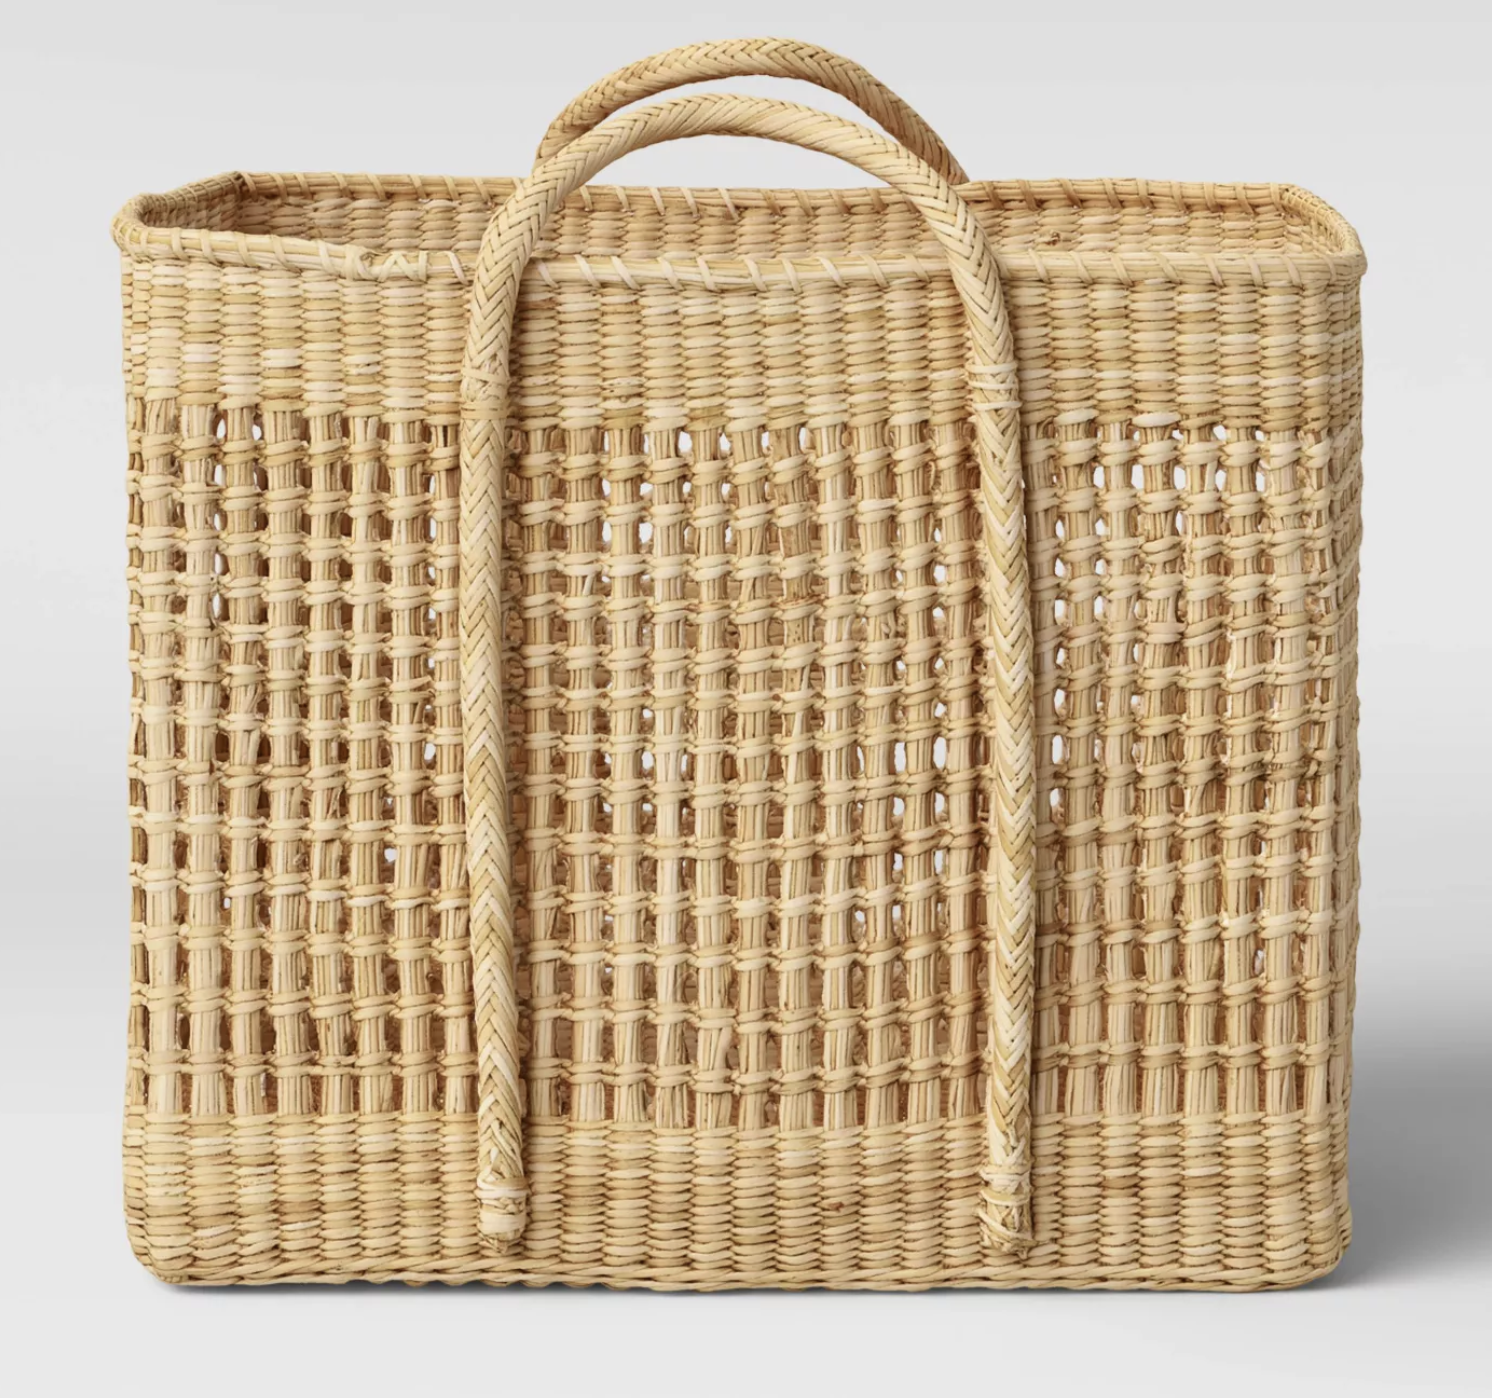 Studio McGee for Target Open Weave Square Basket 